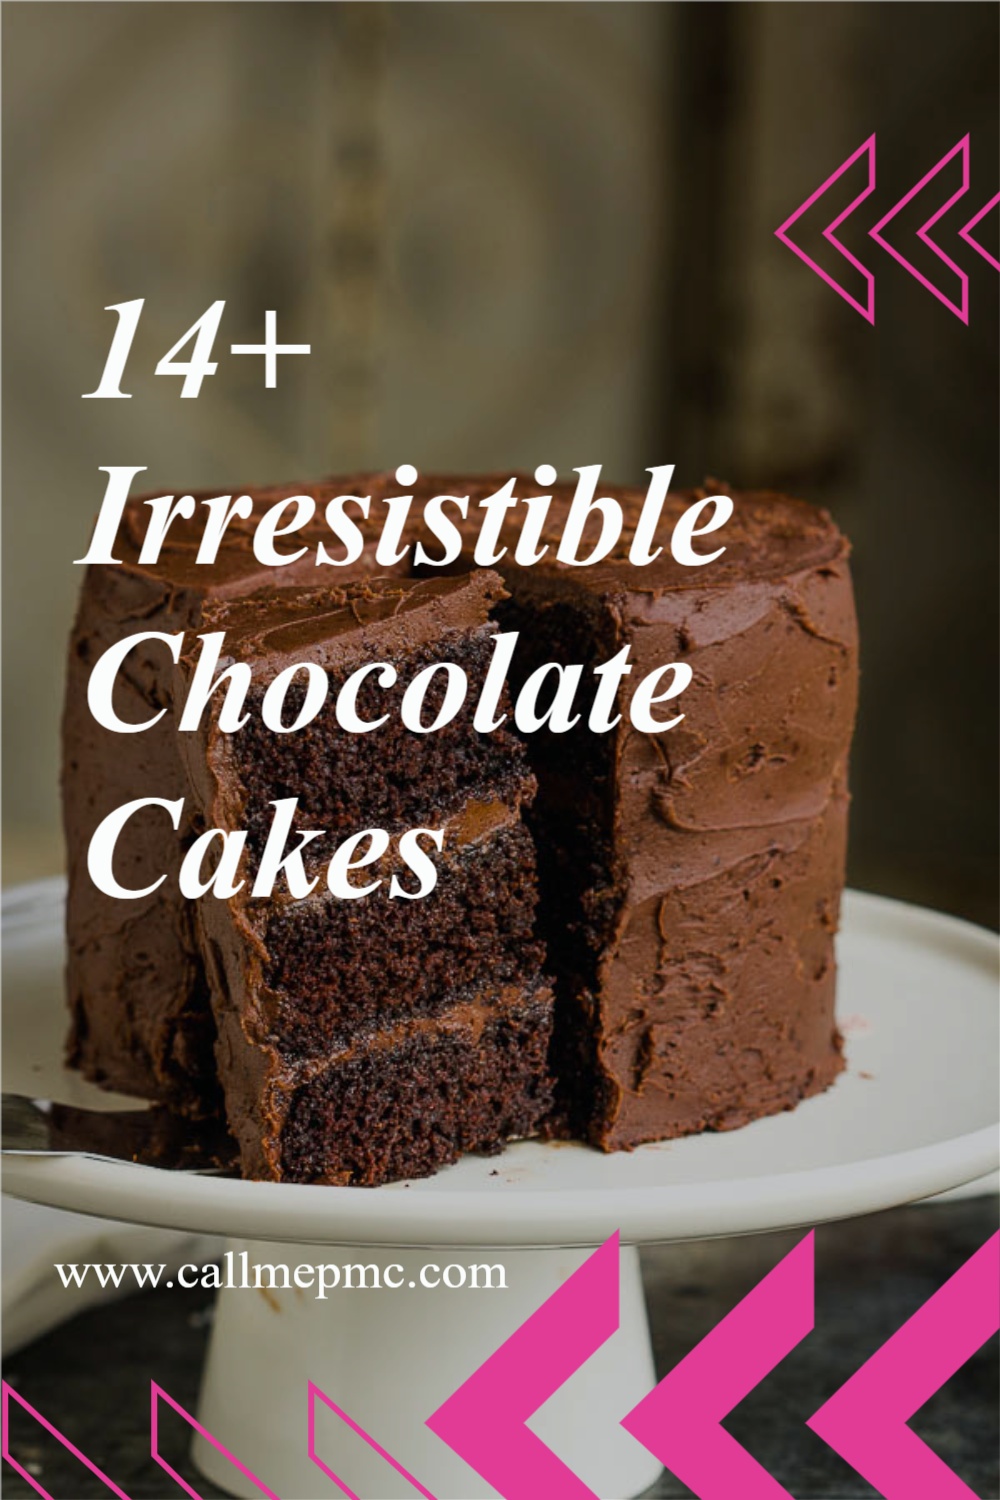 Discover 14 irresistible chocolate cake recipes that will satisfy your sweet tooth.